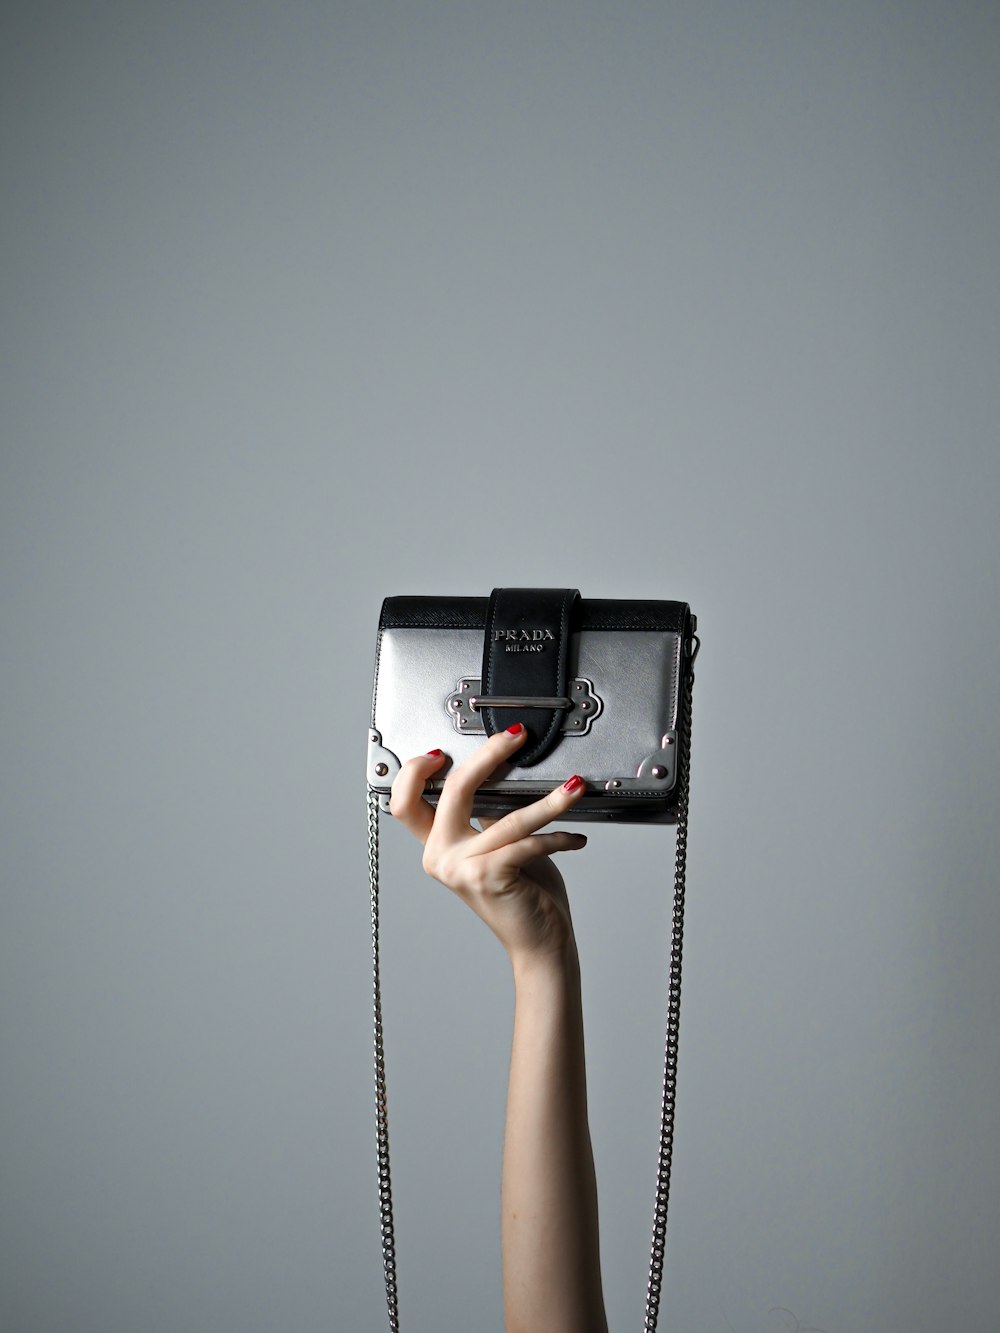 black and white telephone on white wall